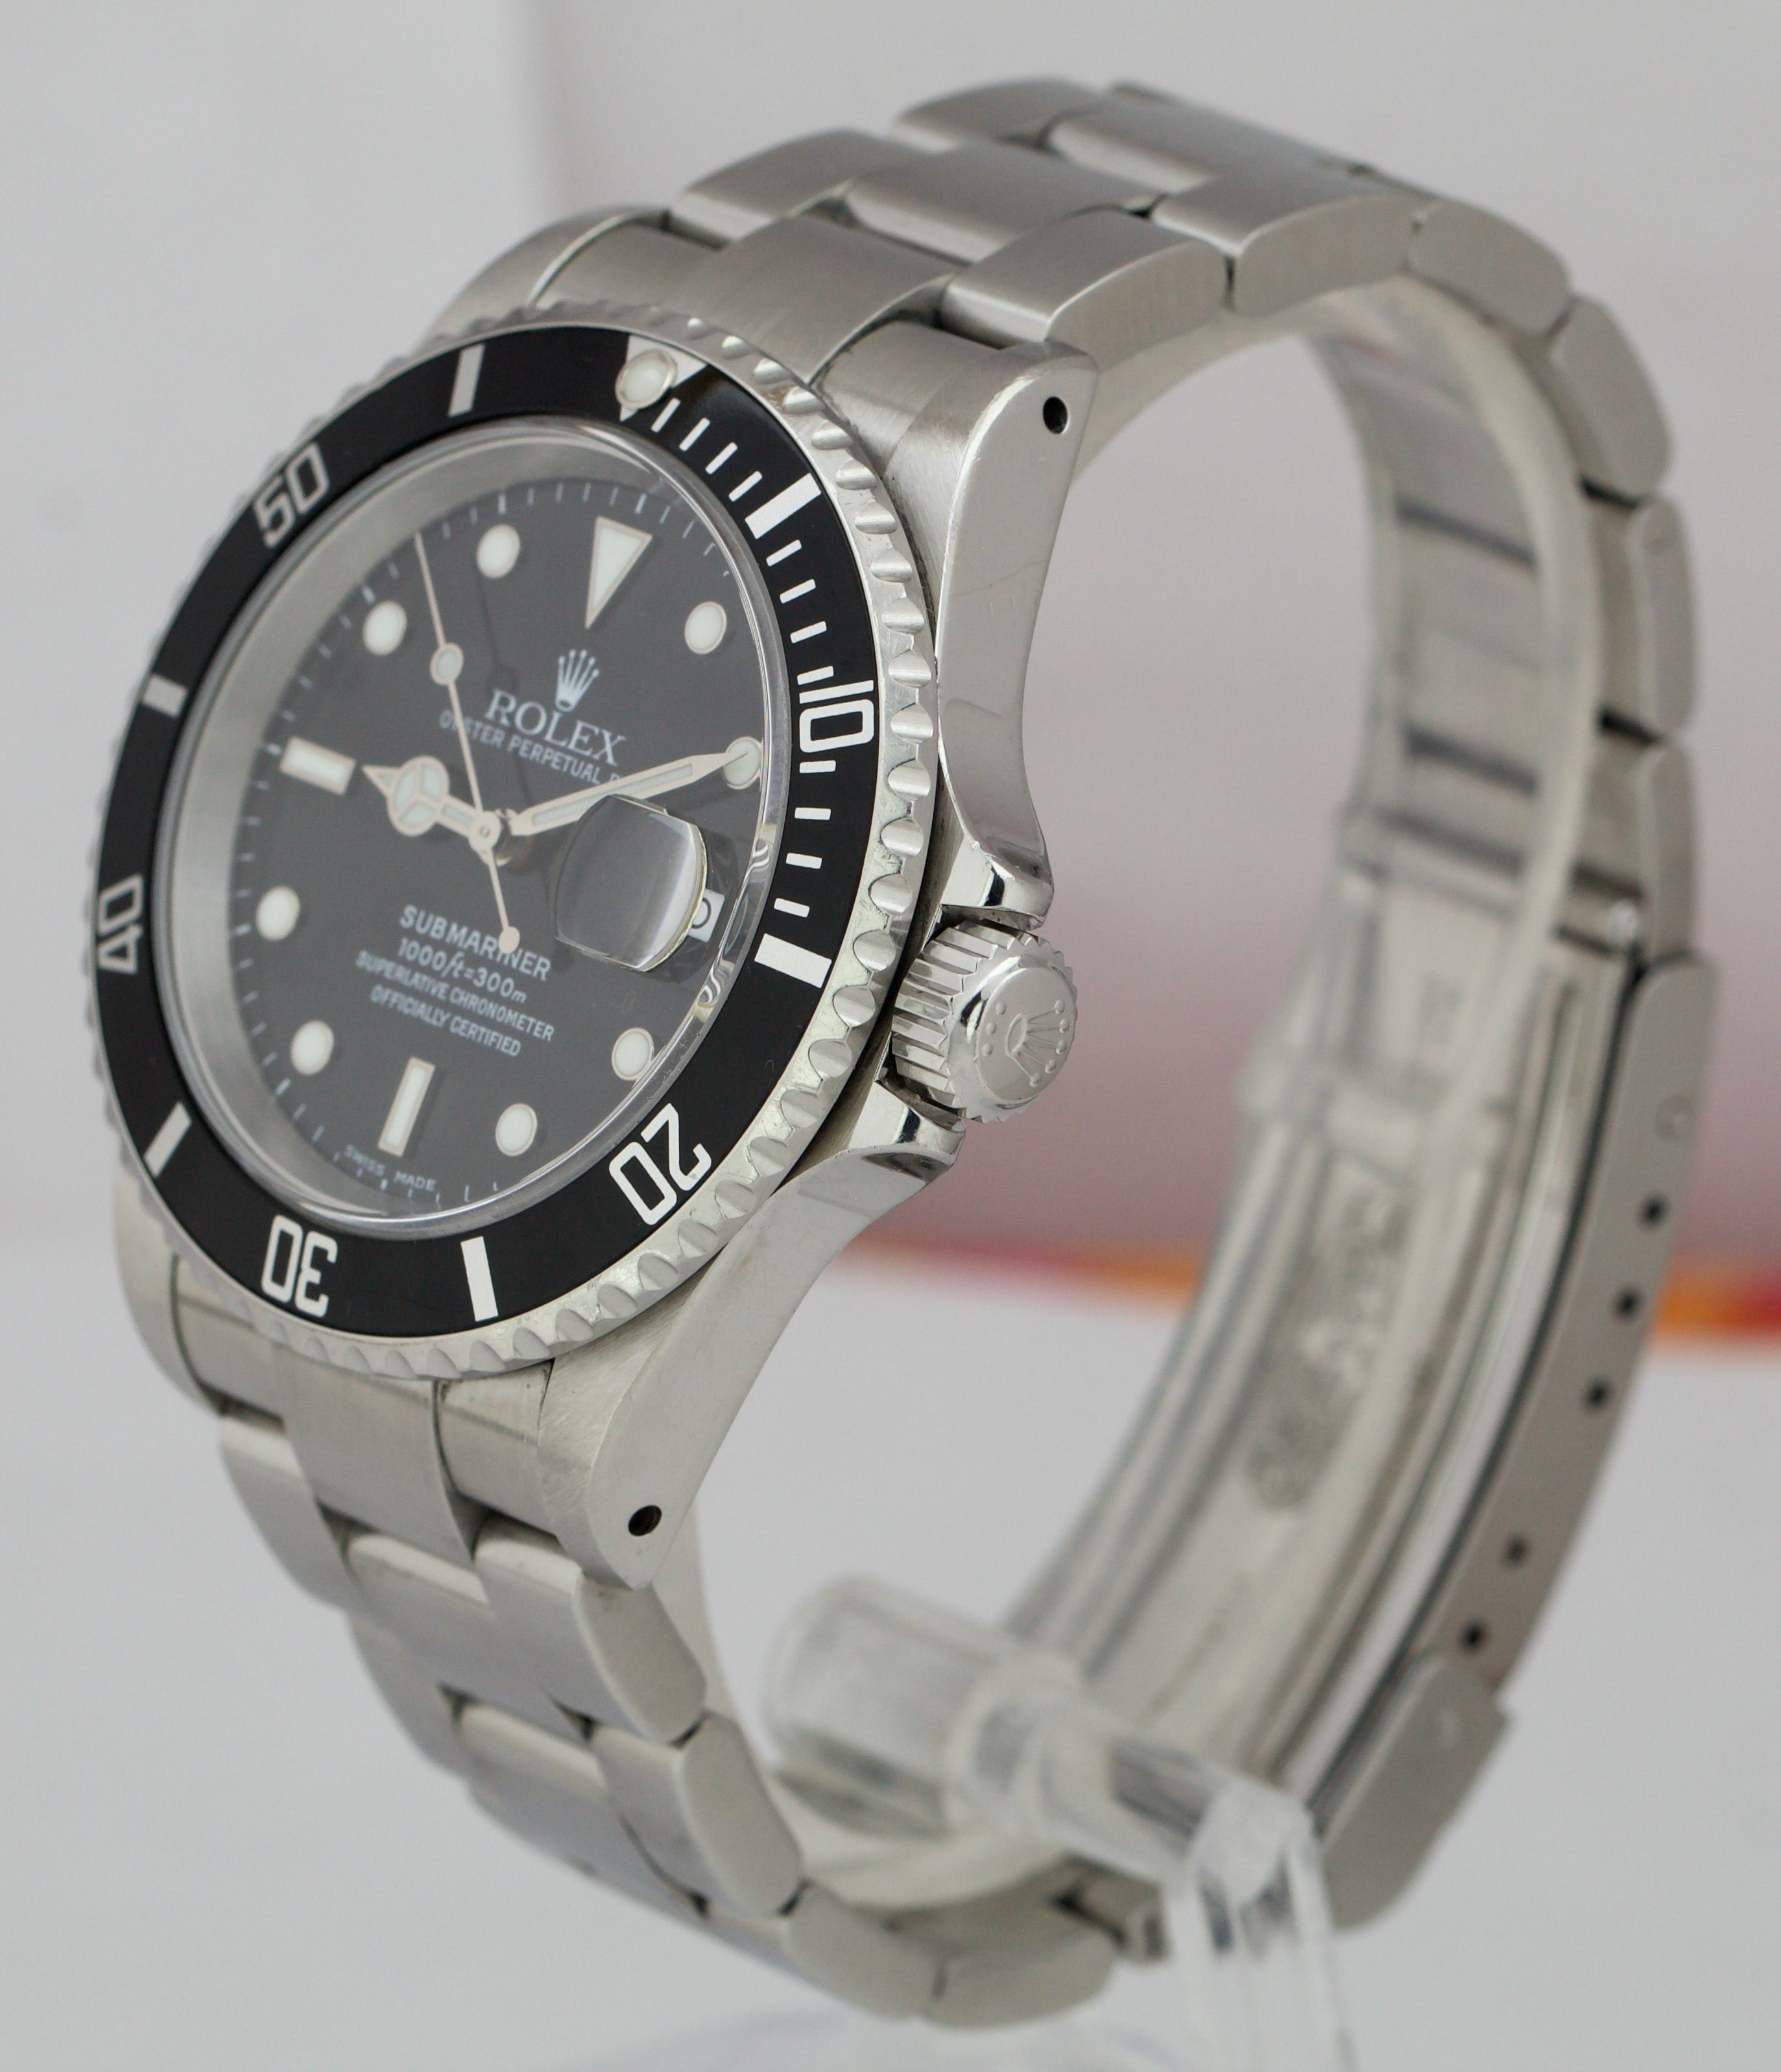 2002 UNPOLISHED Rolex Submariner Date 16610 40mm Black Stainless SEL Watch B+P